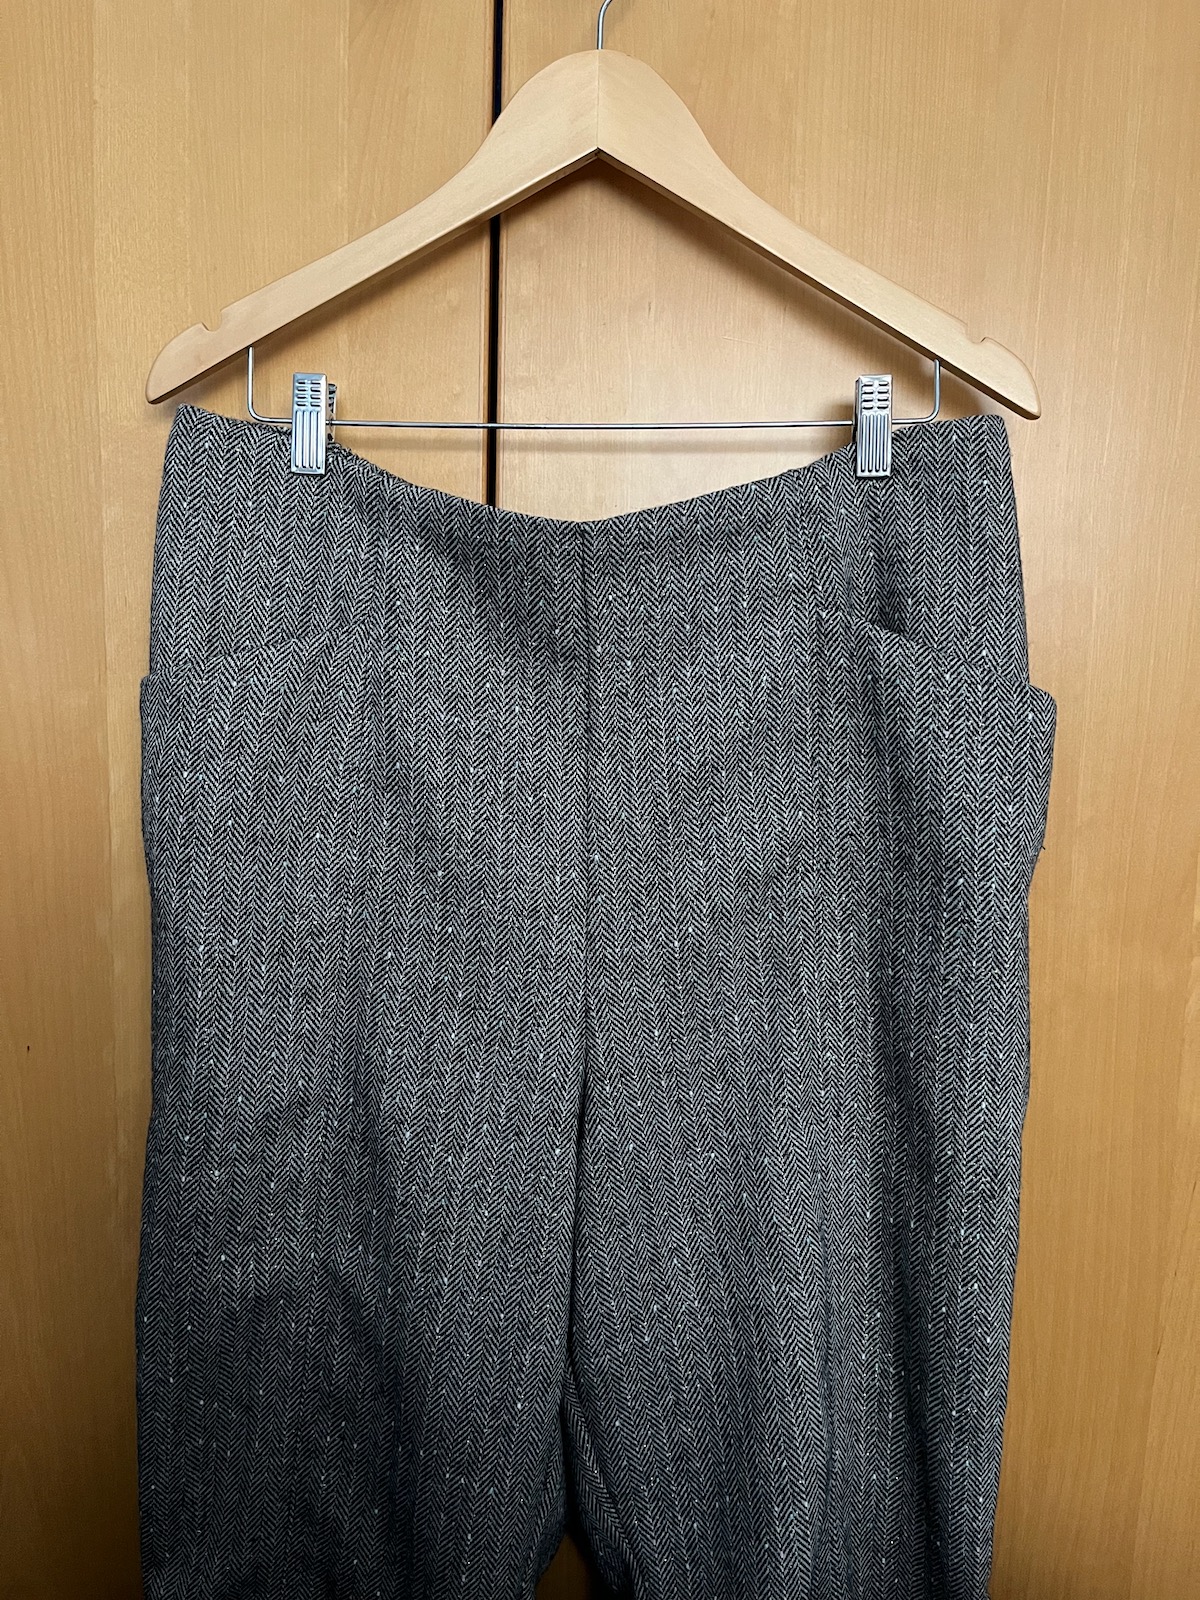 A pair of grey woollen trousers with centre front leg seams and angled pockets on a hanger.